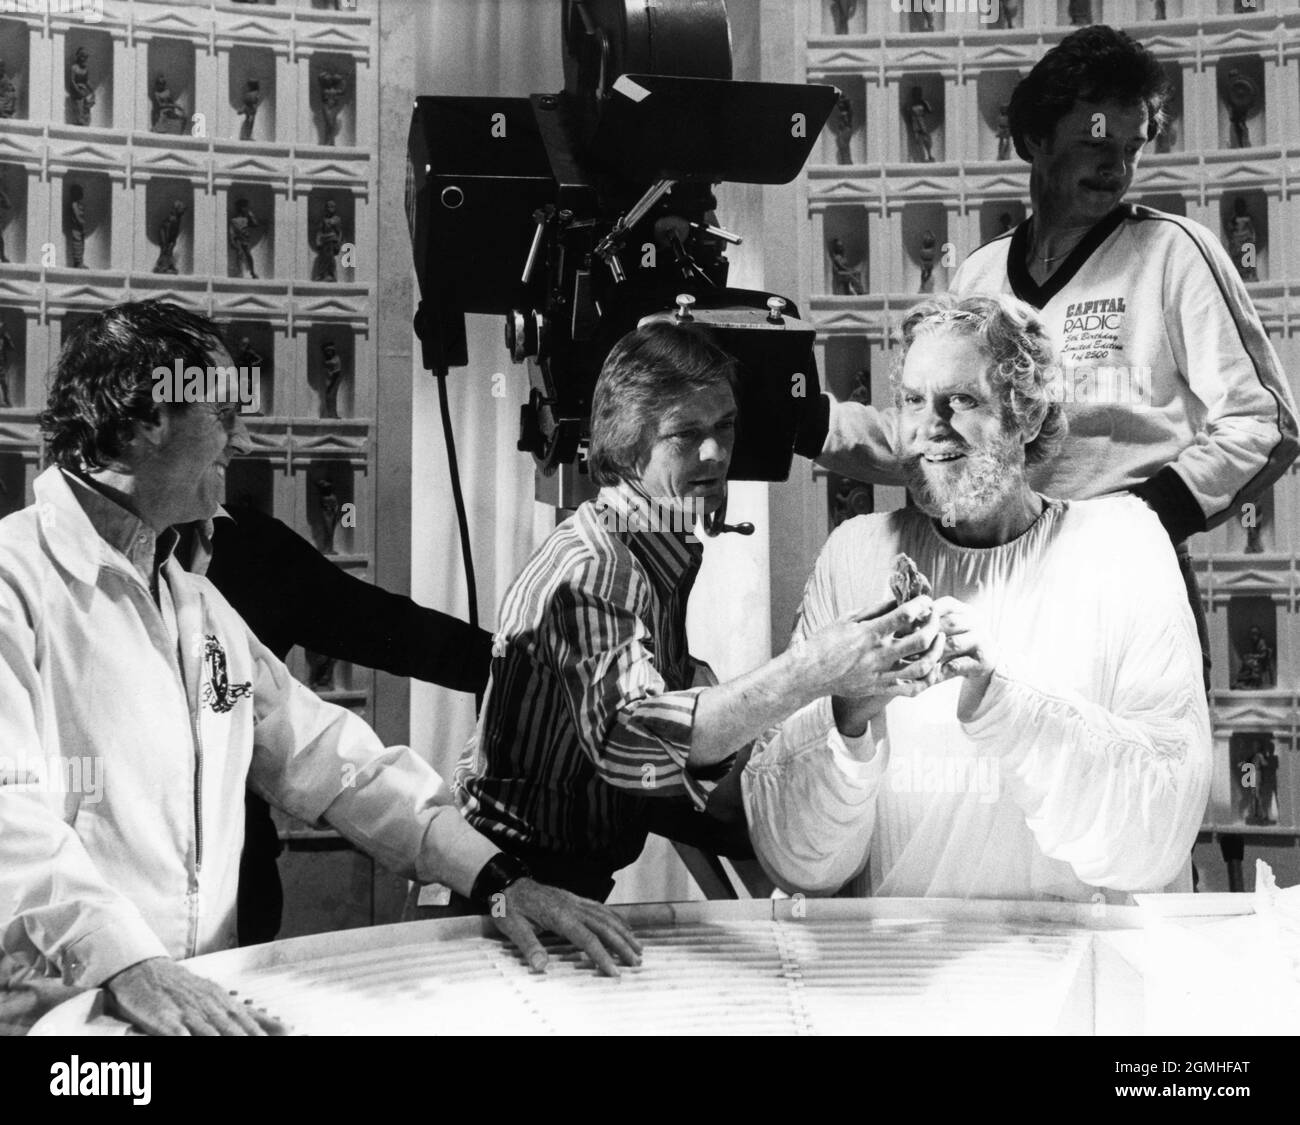 Director DESMOND DAVIS and LAURENCE OLIVIER as Zeus with Movie / Camera Crew on set candid during filming of CLASH OF THE TITANS 1981 director DESMOND DAVIS written by Beverley Cross costume design Emma Porteous creator of special visual effects (Dynamation) Ray Harryhausen music Laurence Rosenthal producers Charles H. Schneer and Ray Harryhausen Charles H. Schneer Productions / Peerford Ltd. / distribution Cinema International Corporation (CIC)  (UK) Metro Goldwyn Mayer (USA) Stock Photo